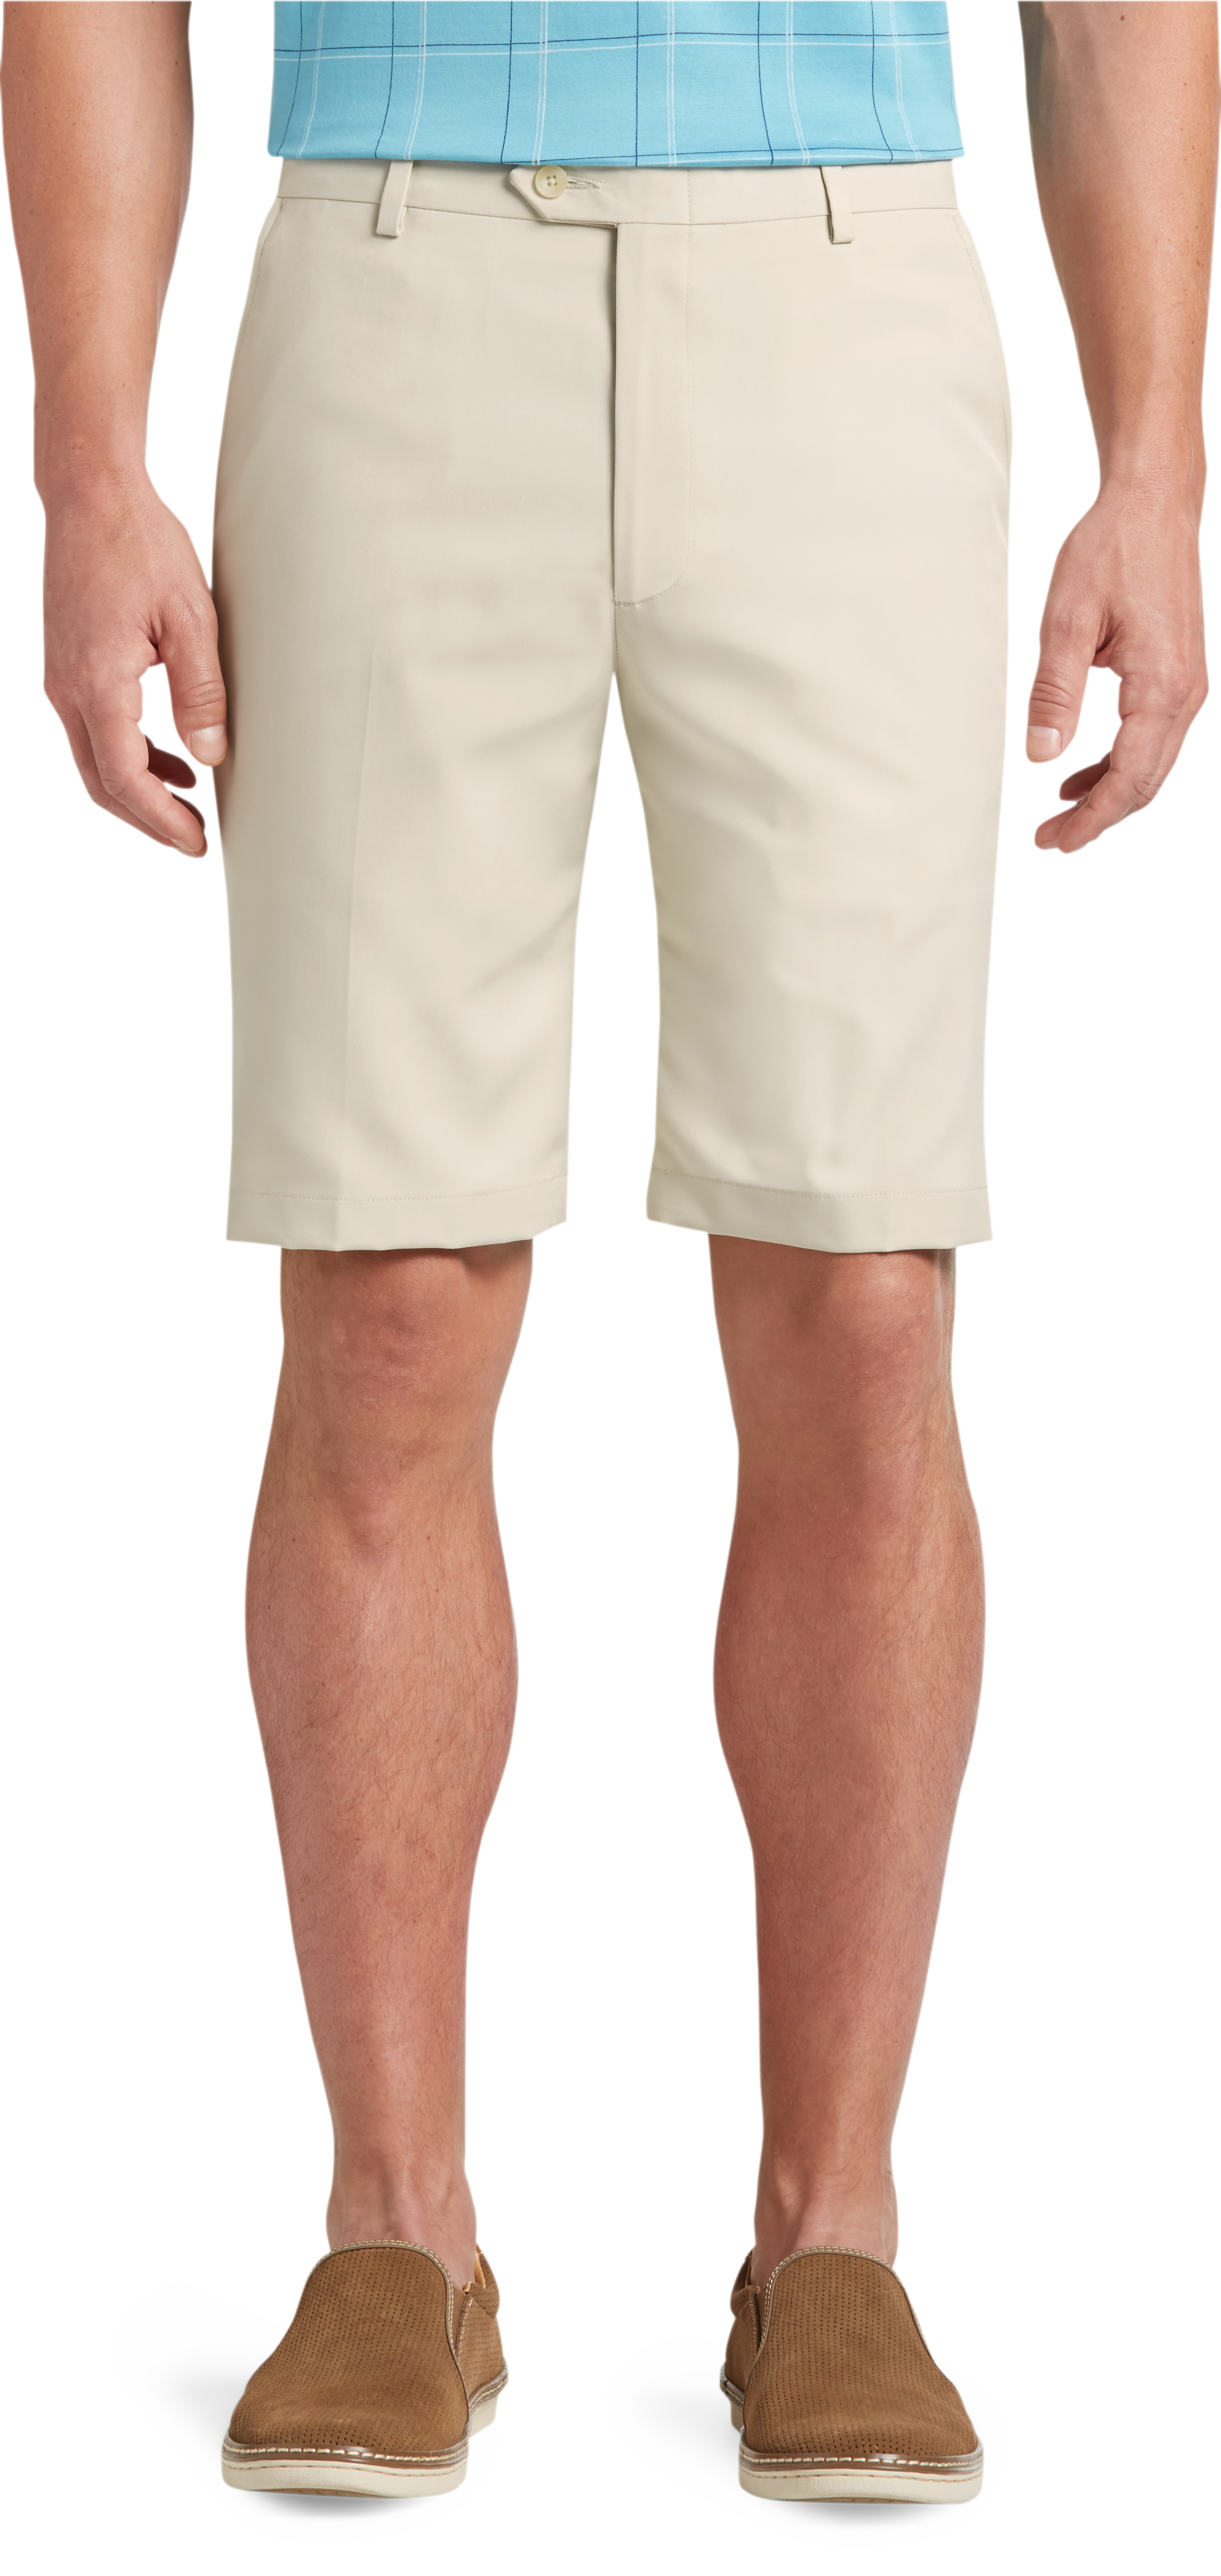 David Leadbetter Tailored Fit Flat Front Shorts CLEARANCE - All ...